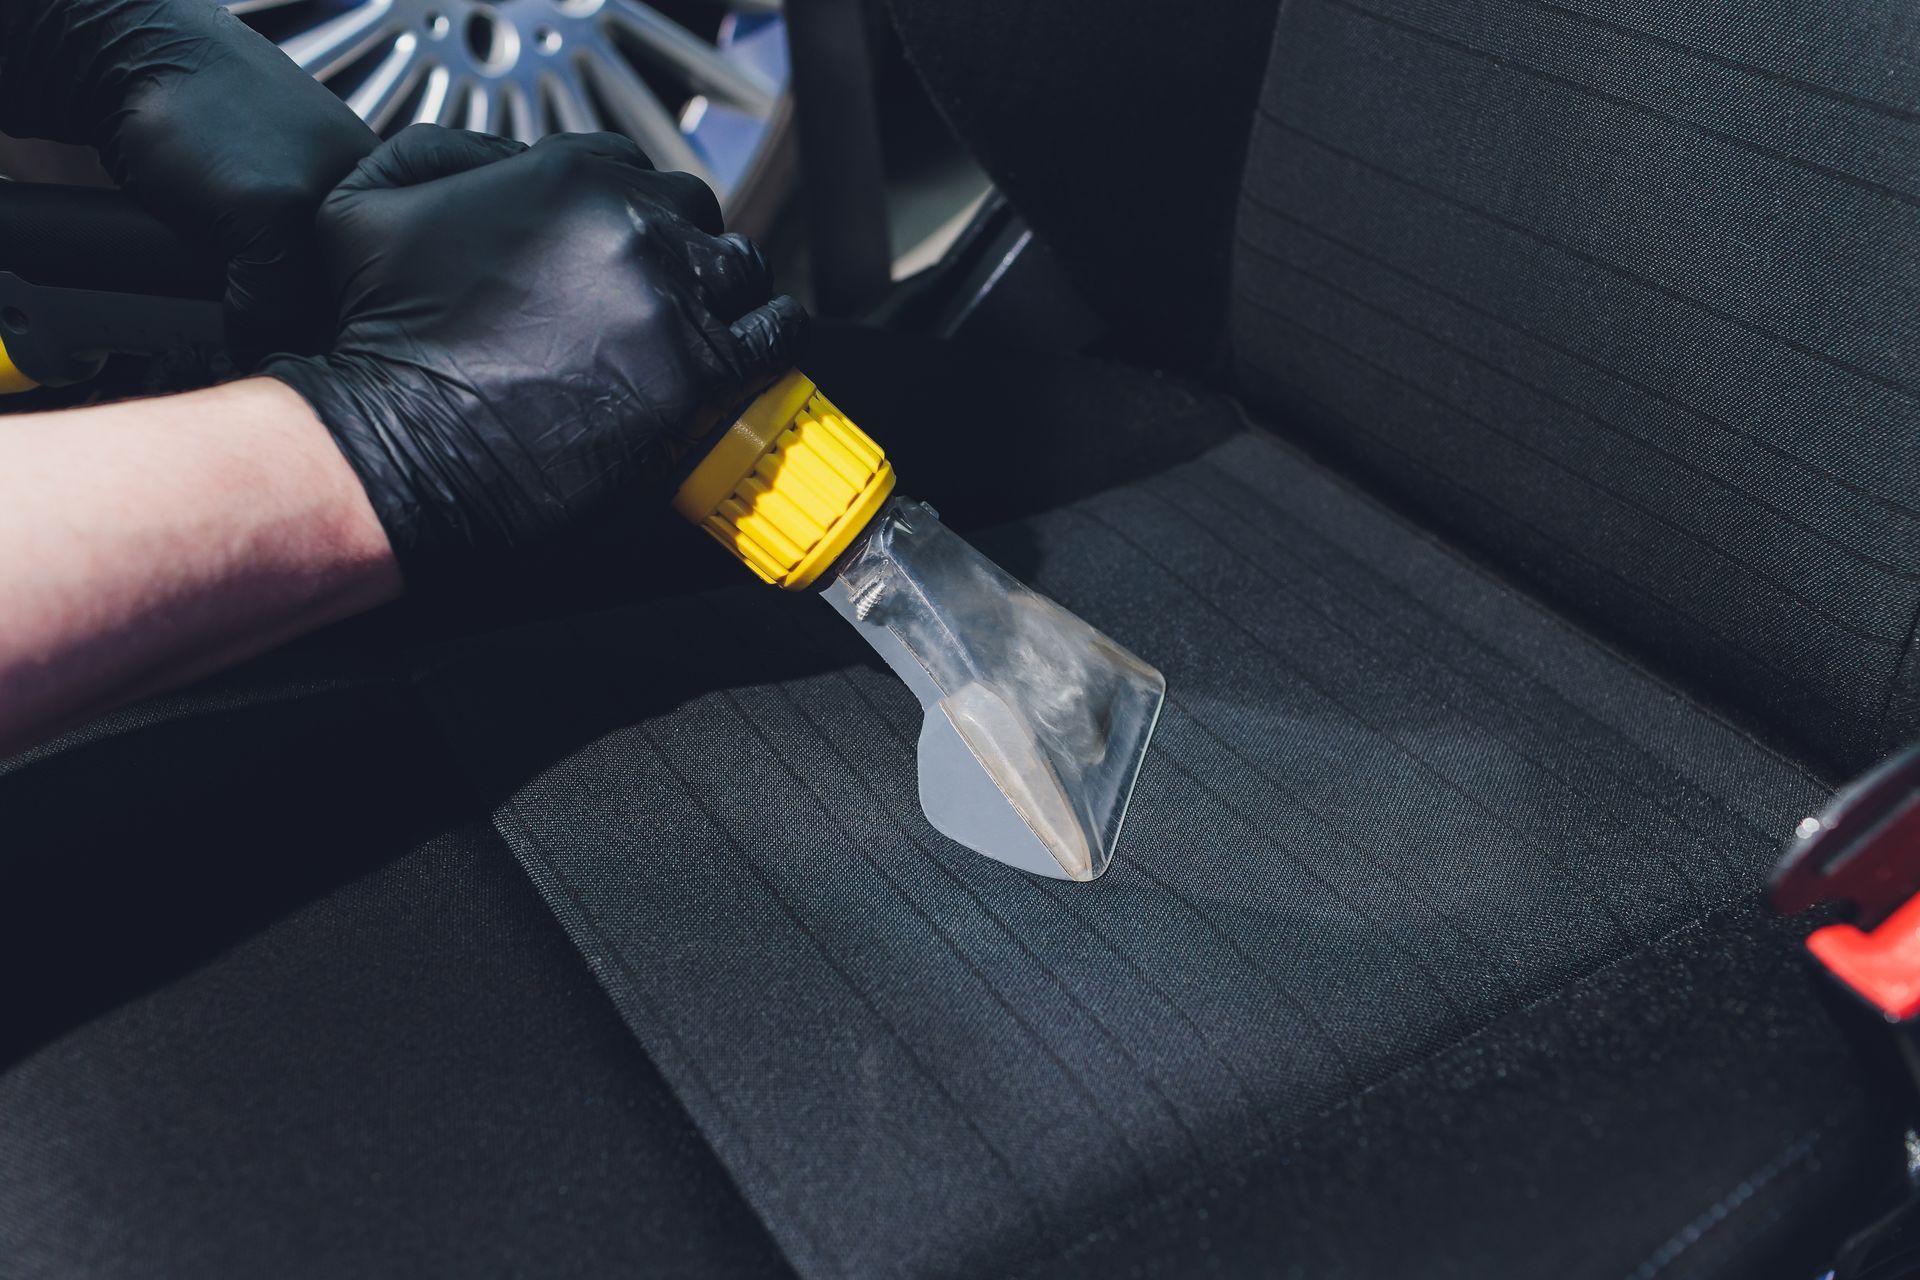 hand wearing black vinyl glove uses an upholstery cleaner to clean and disinfect car seats